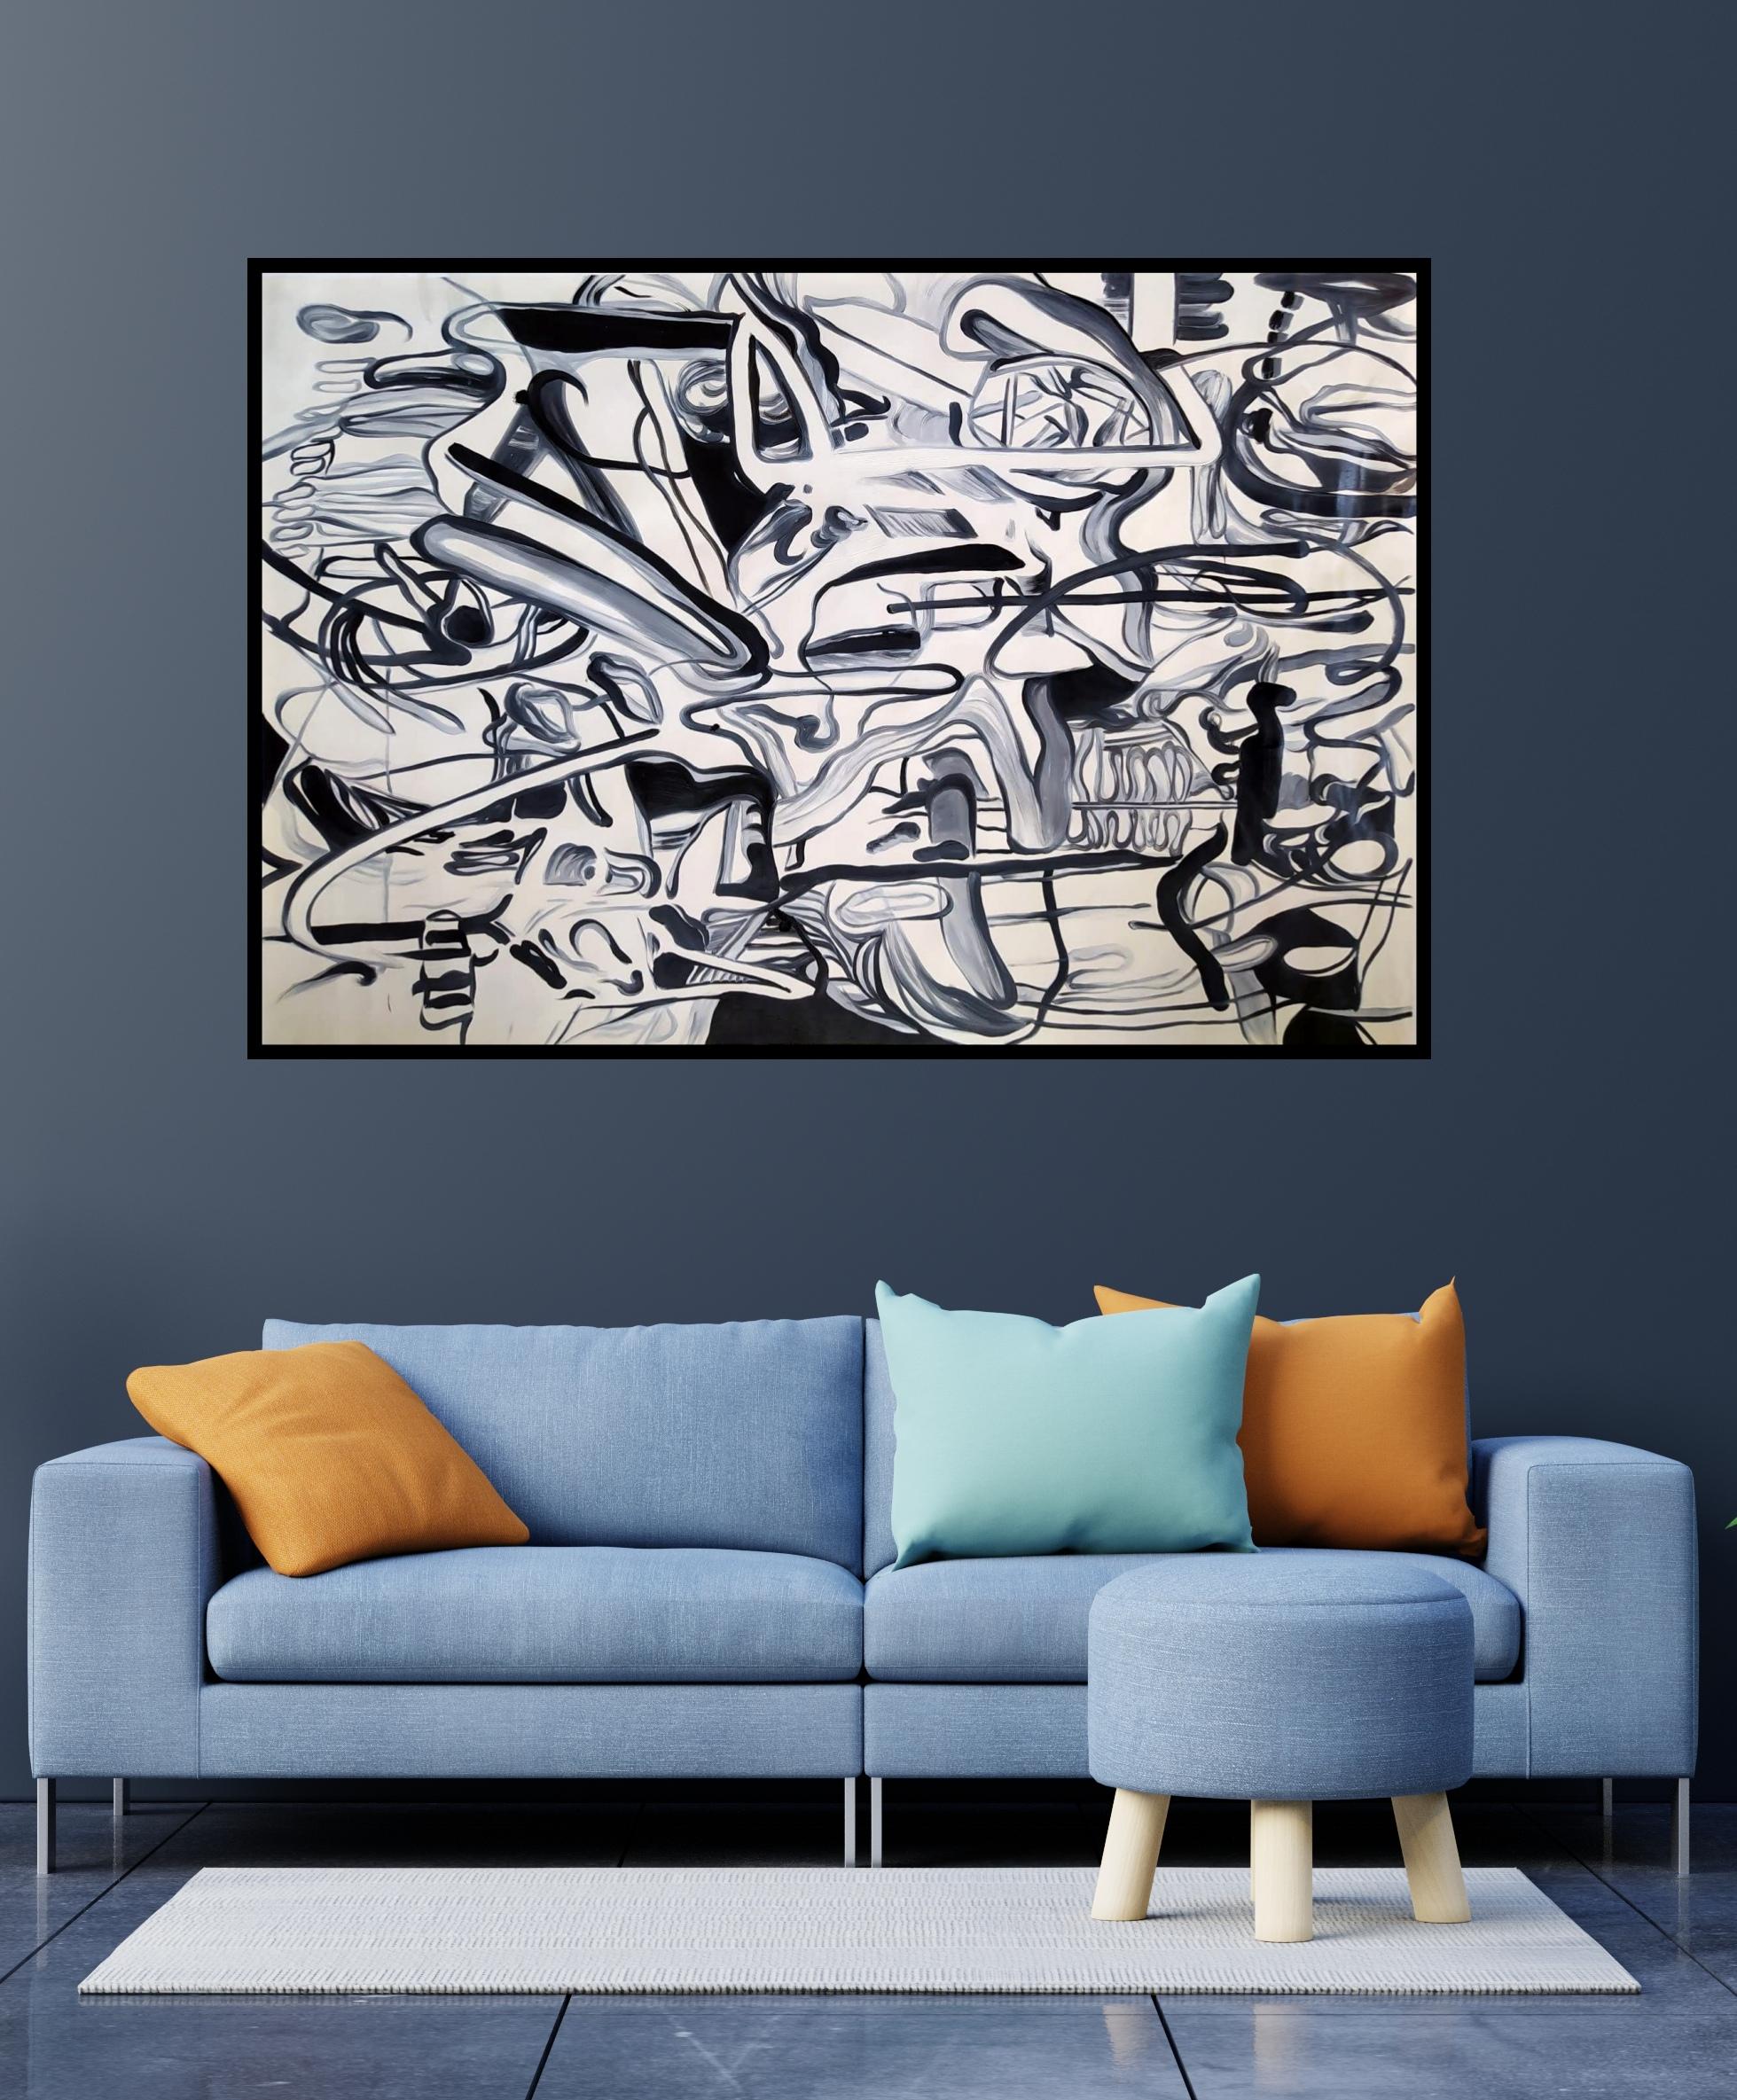 ABSTRACT WALL - Painting by Angel Rivas